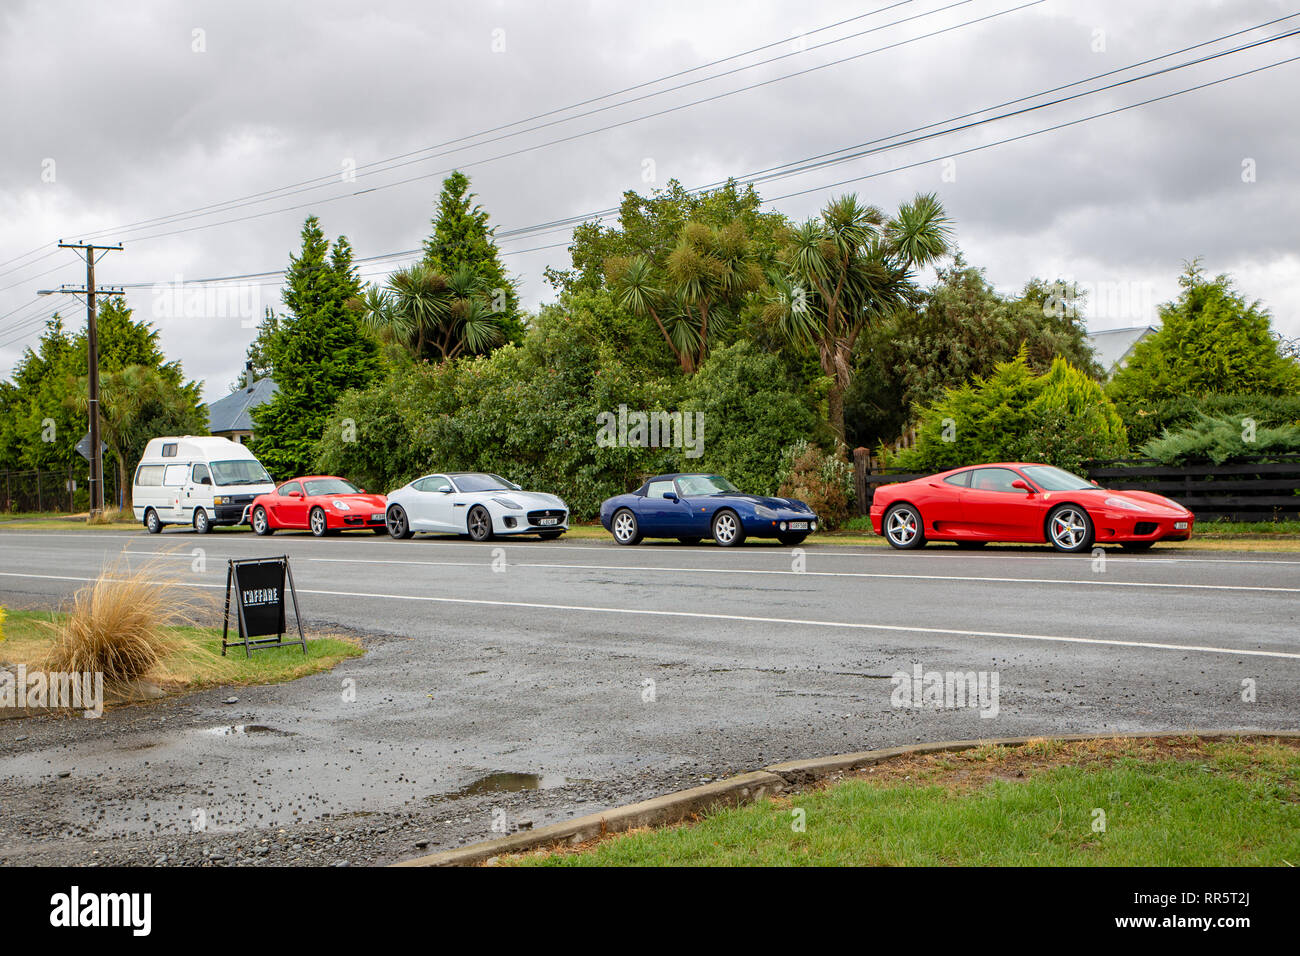 Springfield, Canterbury, New Zealand, February 24 2019: A tourist's van and luxury cars parked along a main rural highway outside a cafe Stock Photo